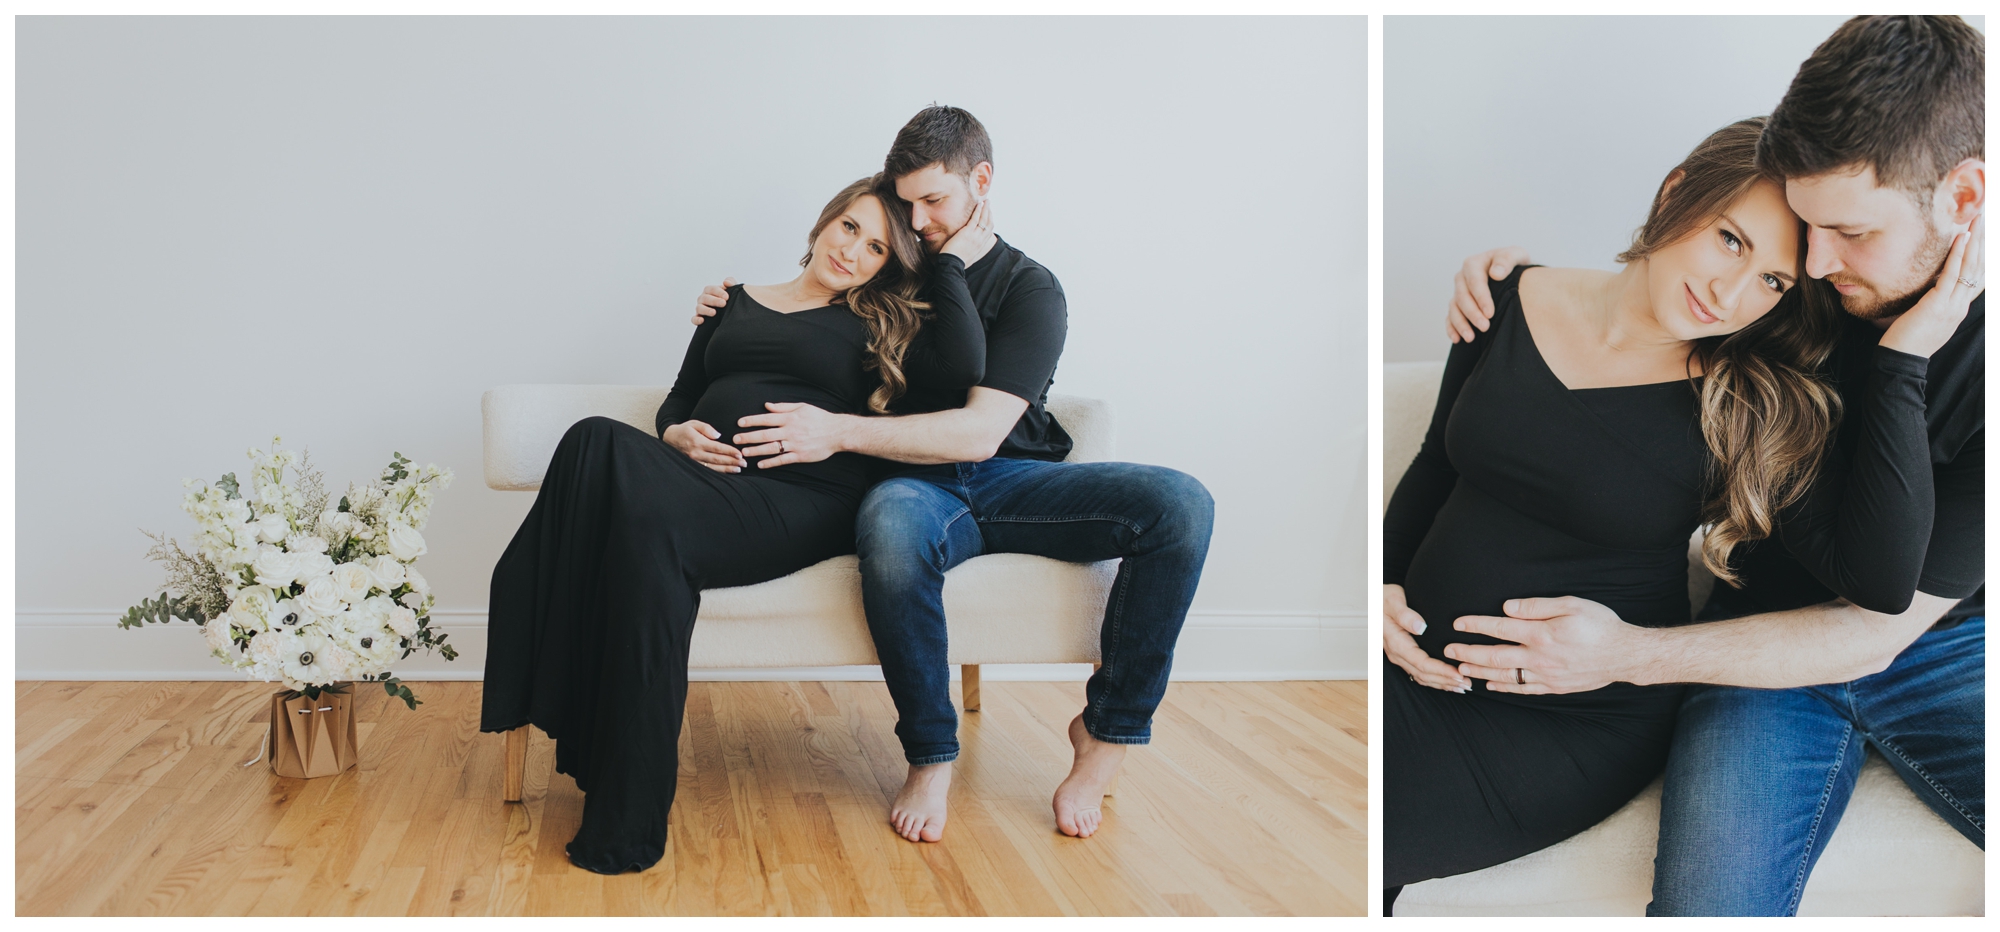 A Darling Studio Wicker Park Chicago maternity session